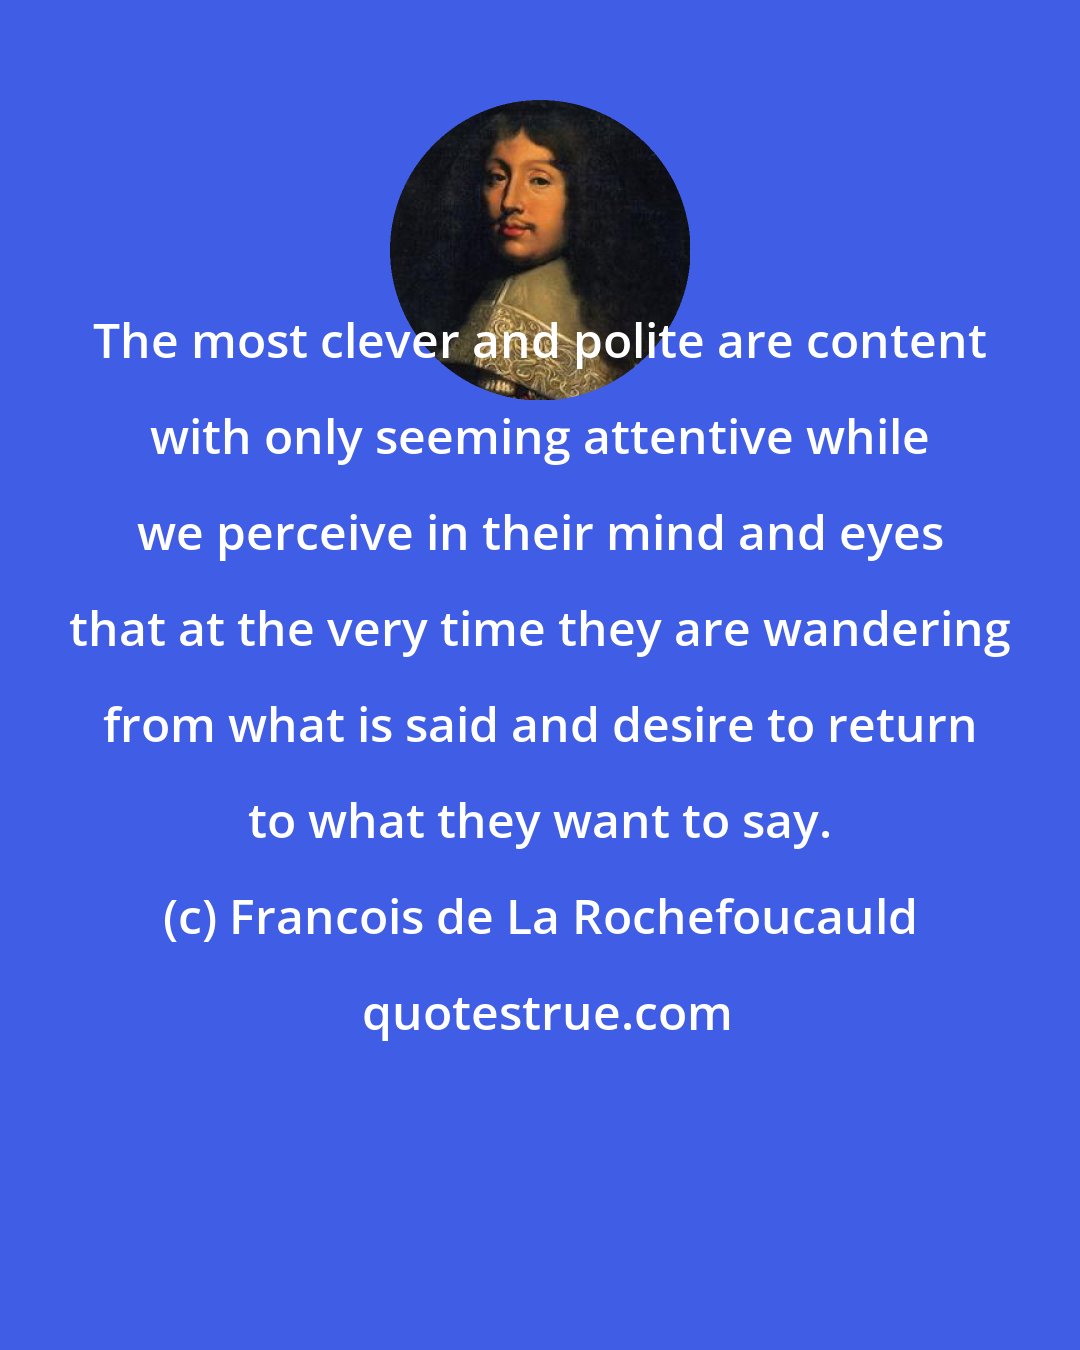 Francois de La Rochefoucauld: The most clever and polite are content with only seeming attentive while we perceive in their mind and eyes that at the very time they are wandering from what is said and desire to return to what they want to say.